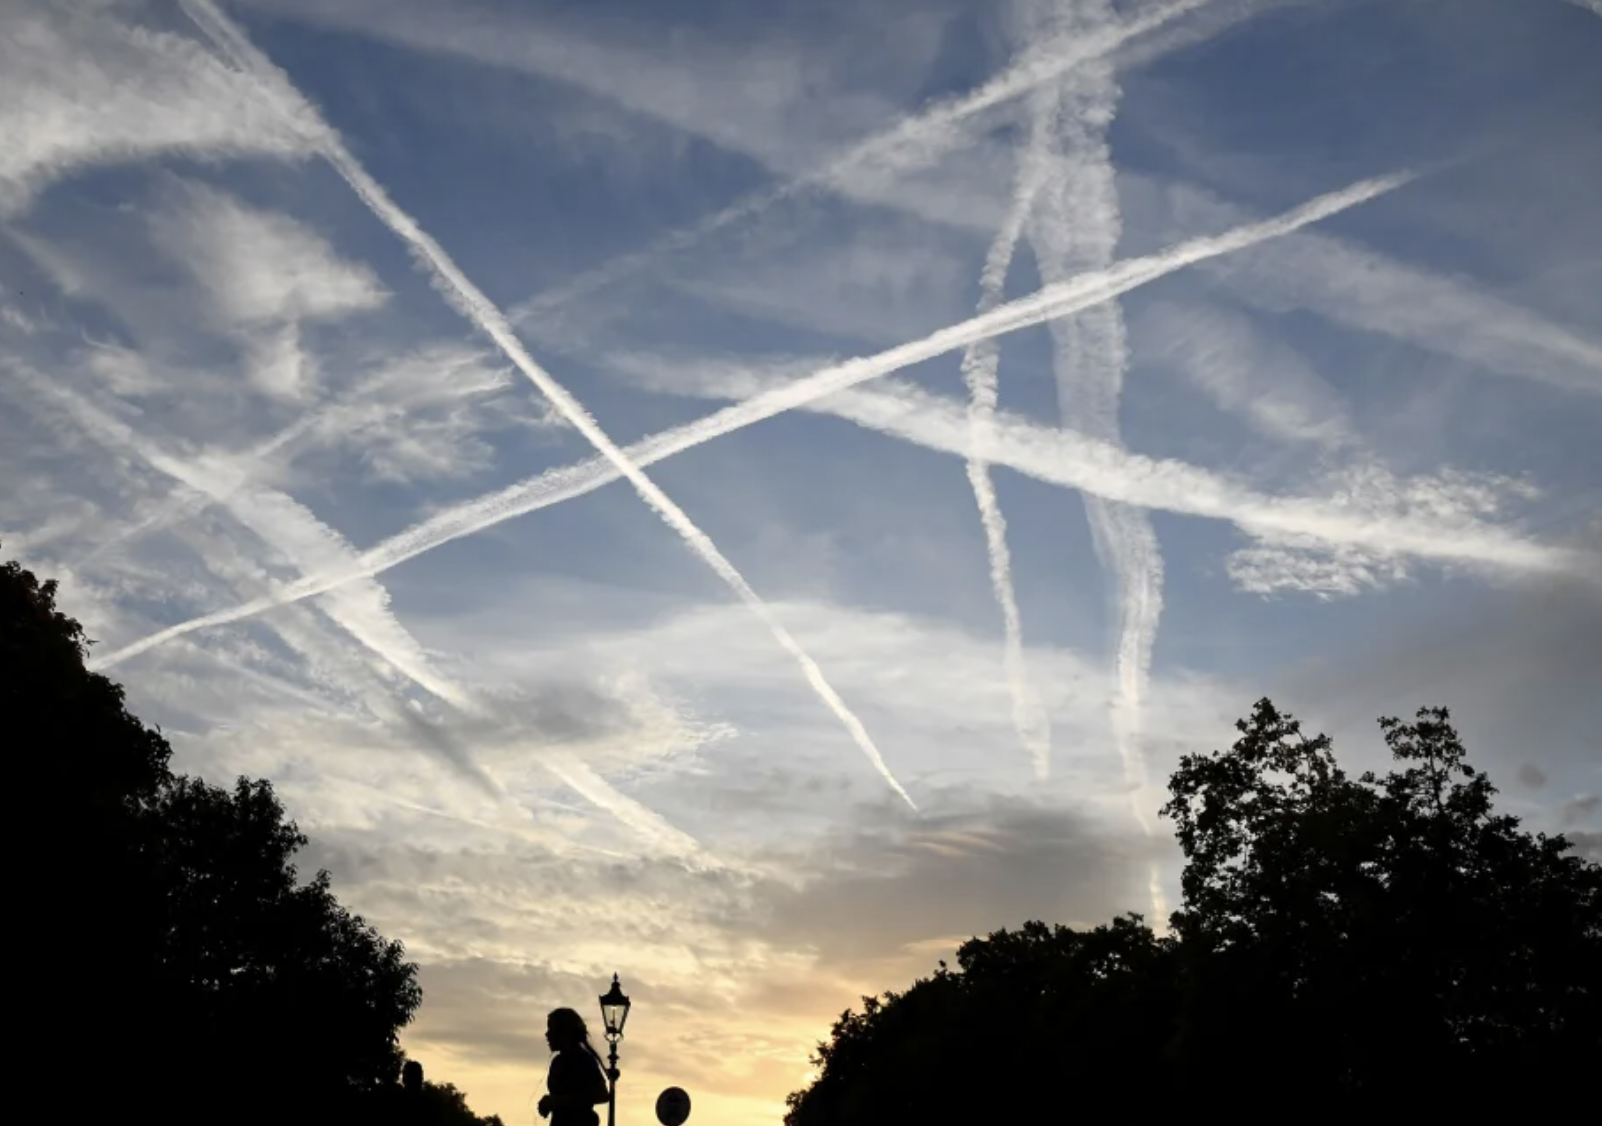 Republican Lawmakers Scramble to Ban Chemtrails (Seriously)